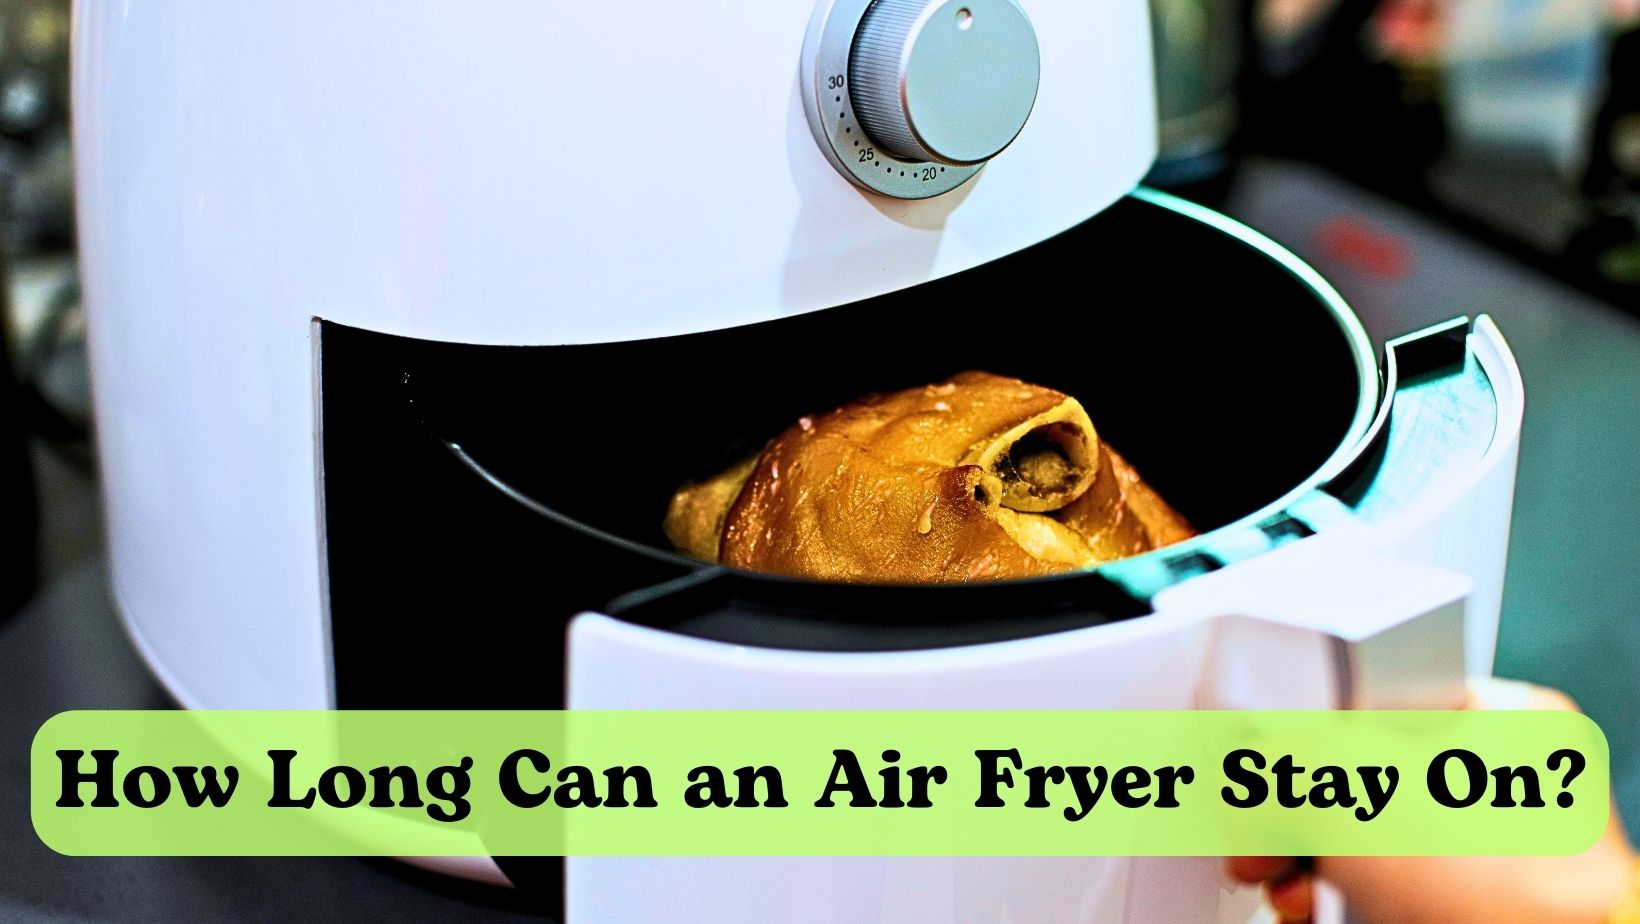 An air fryer with a bread inside.